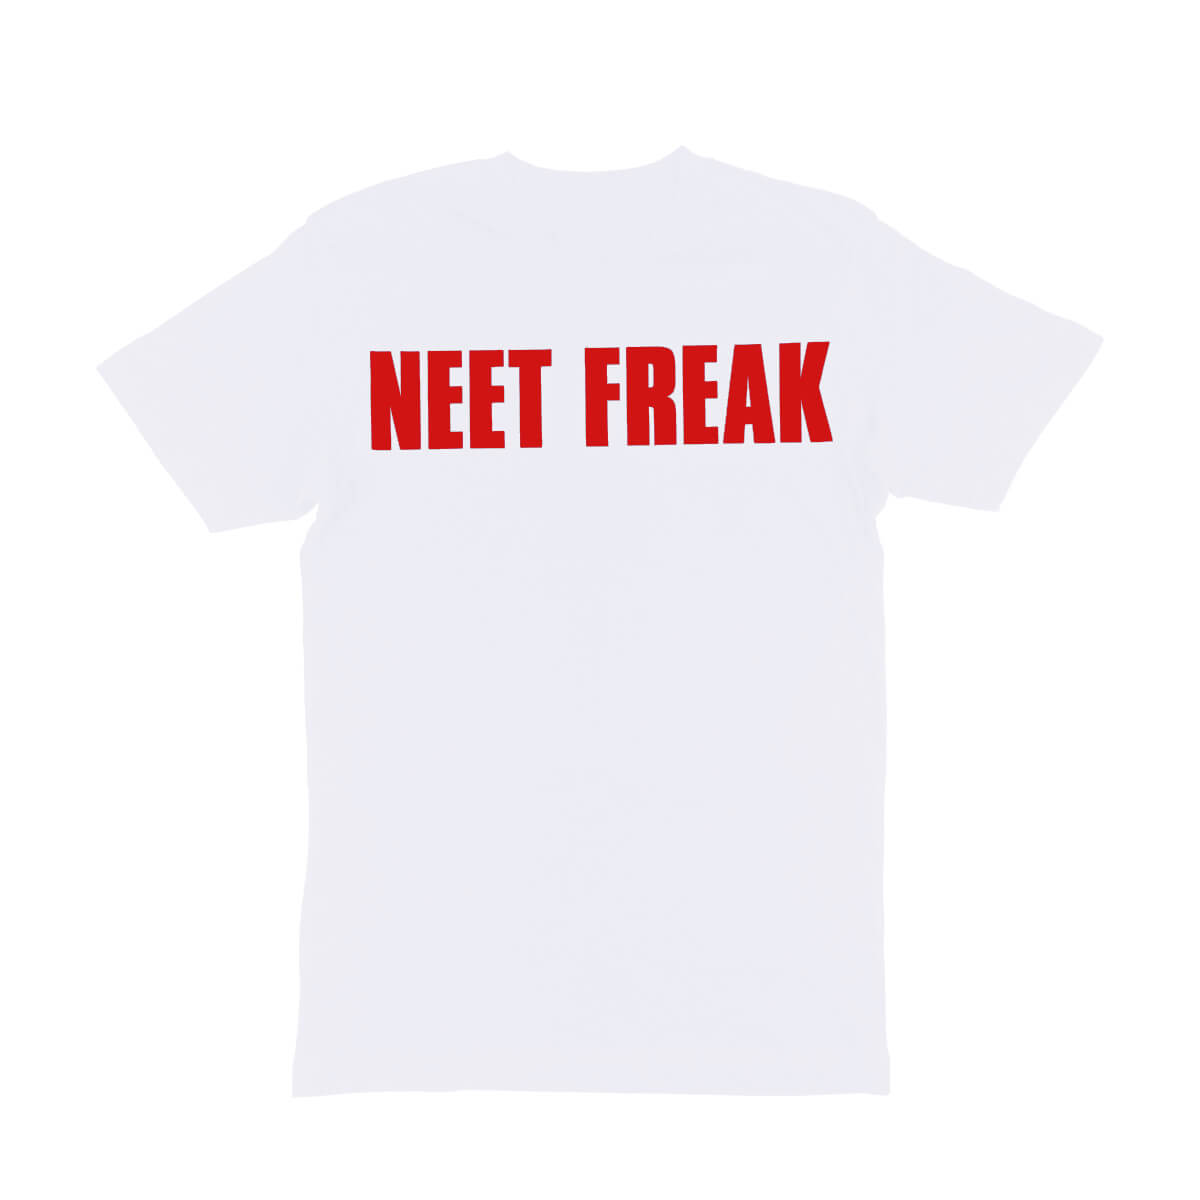 Men's T shirt White and Red